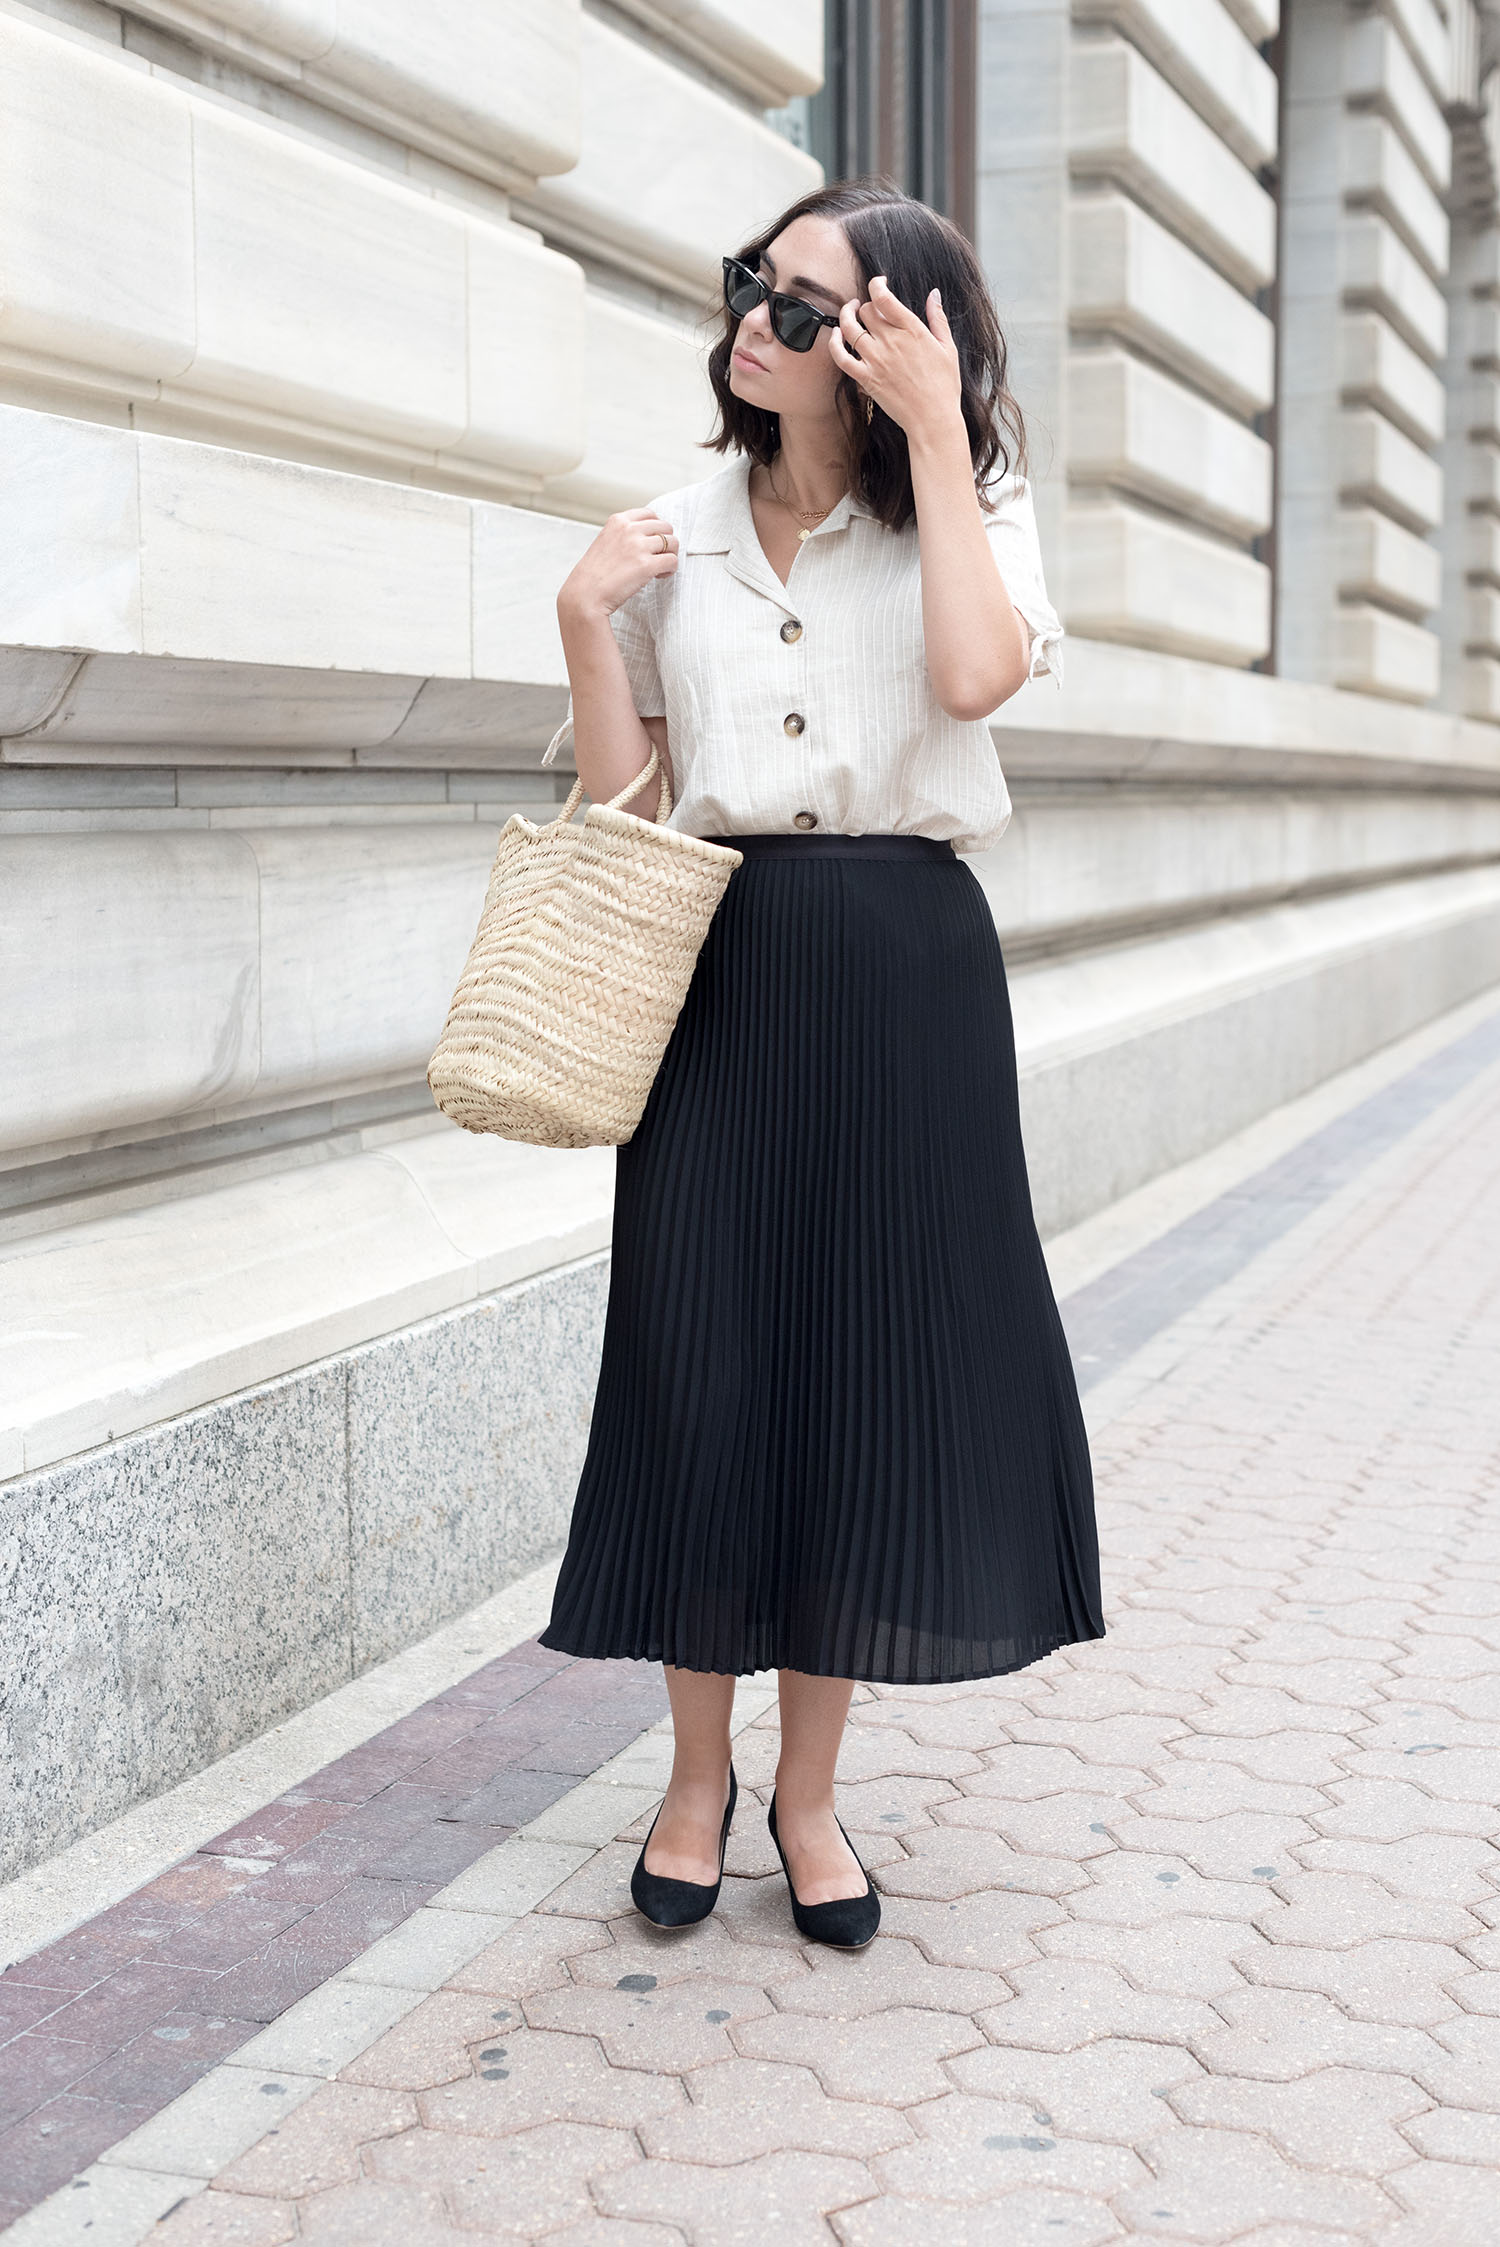 Top Winnipeg fashion blogger Cee Fardoe of Coco & Vera walks through the Exchange District wearing a black pleated skirt from Aritzia and a linen blouse from Mango